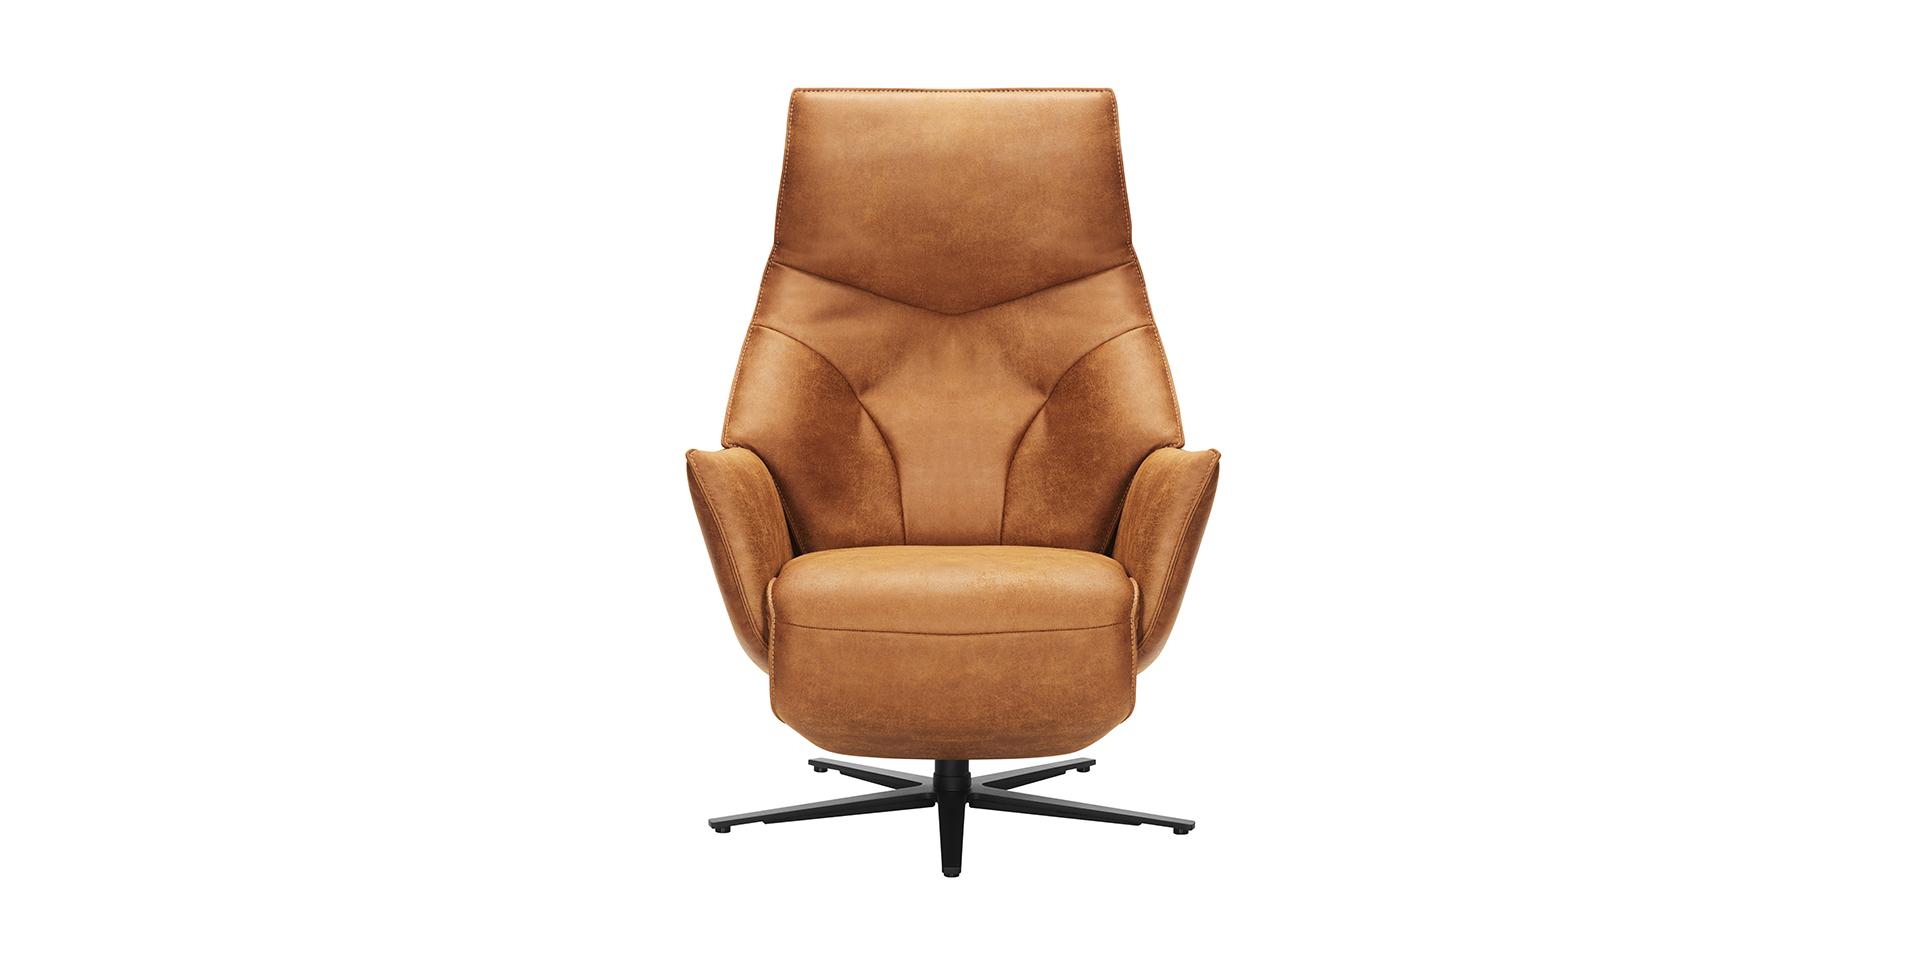 Slider Fauteuil relaxation 7937 (image 1)